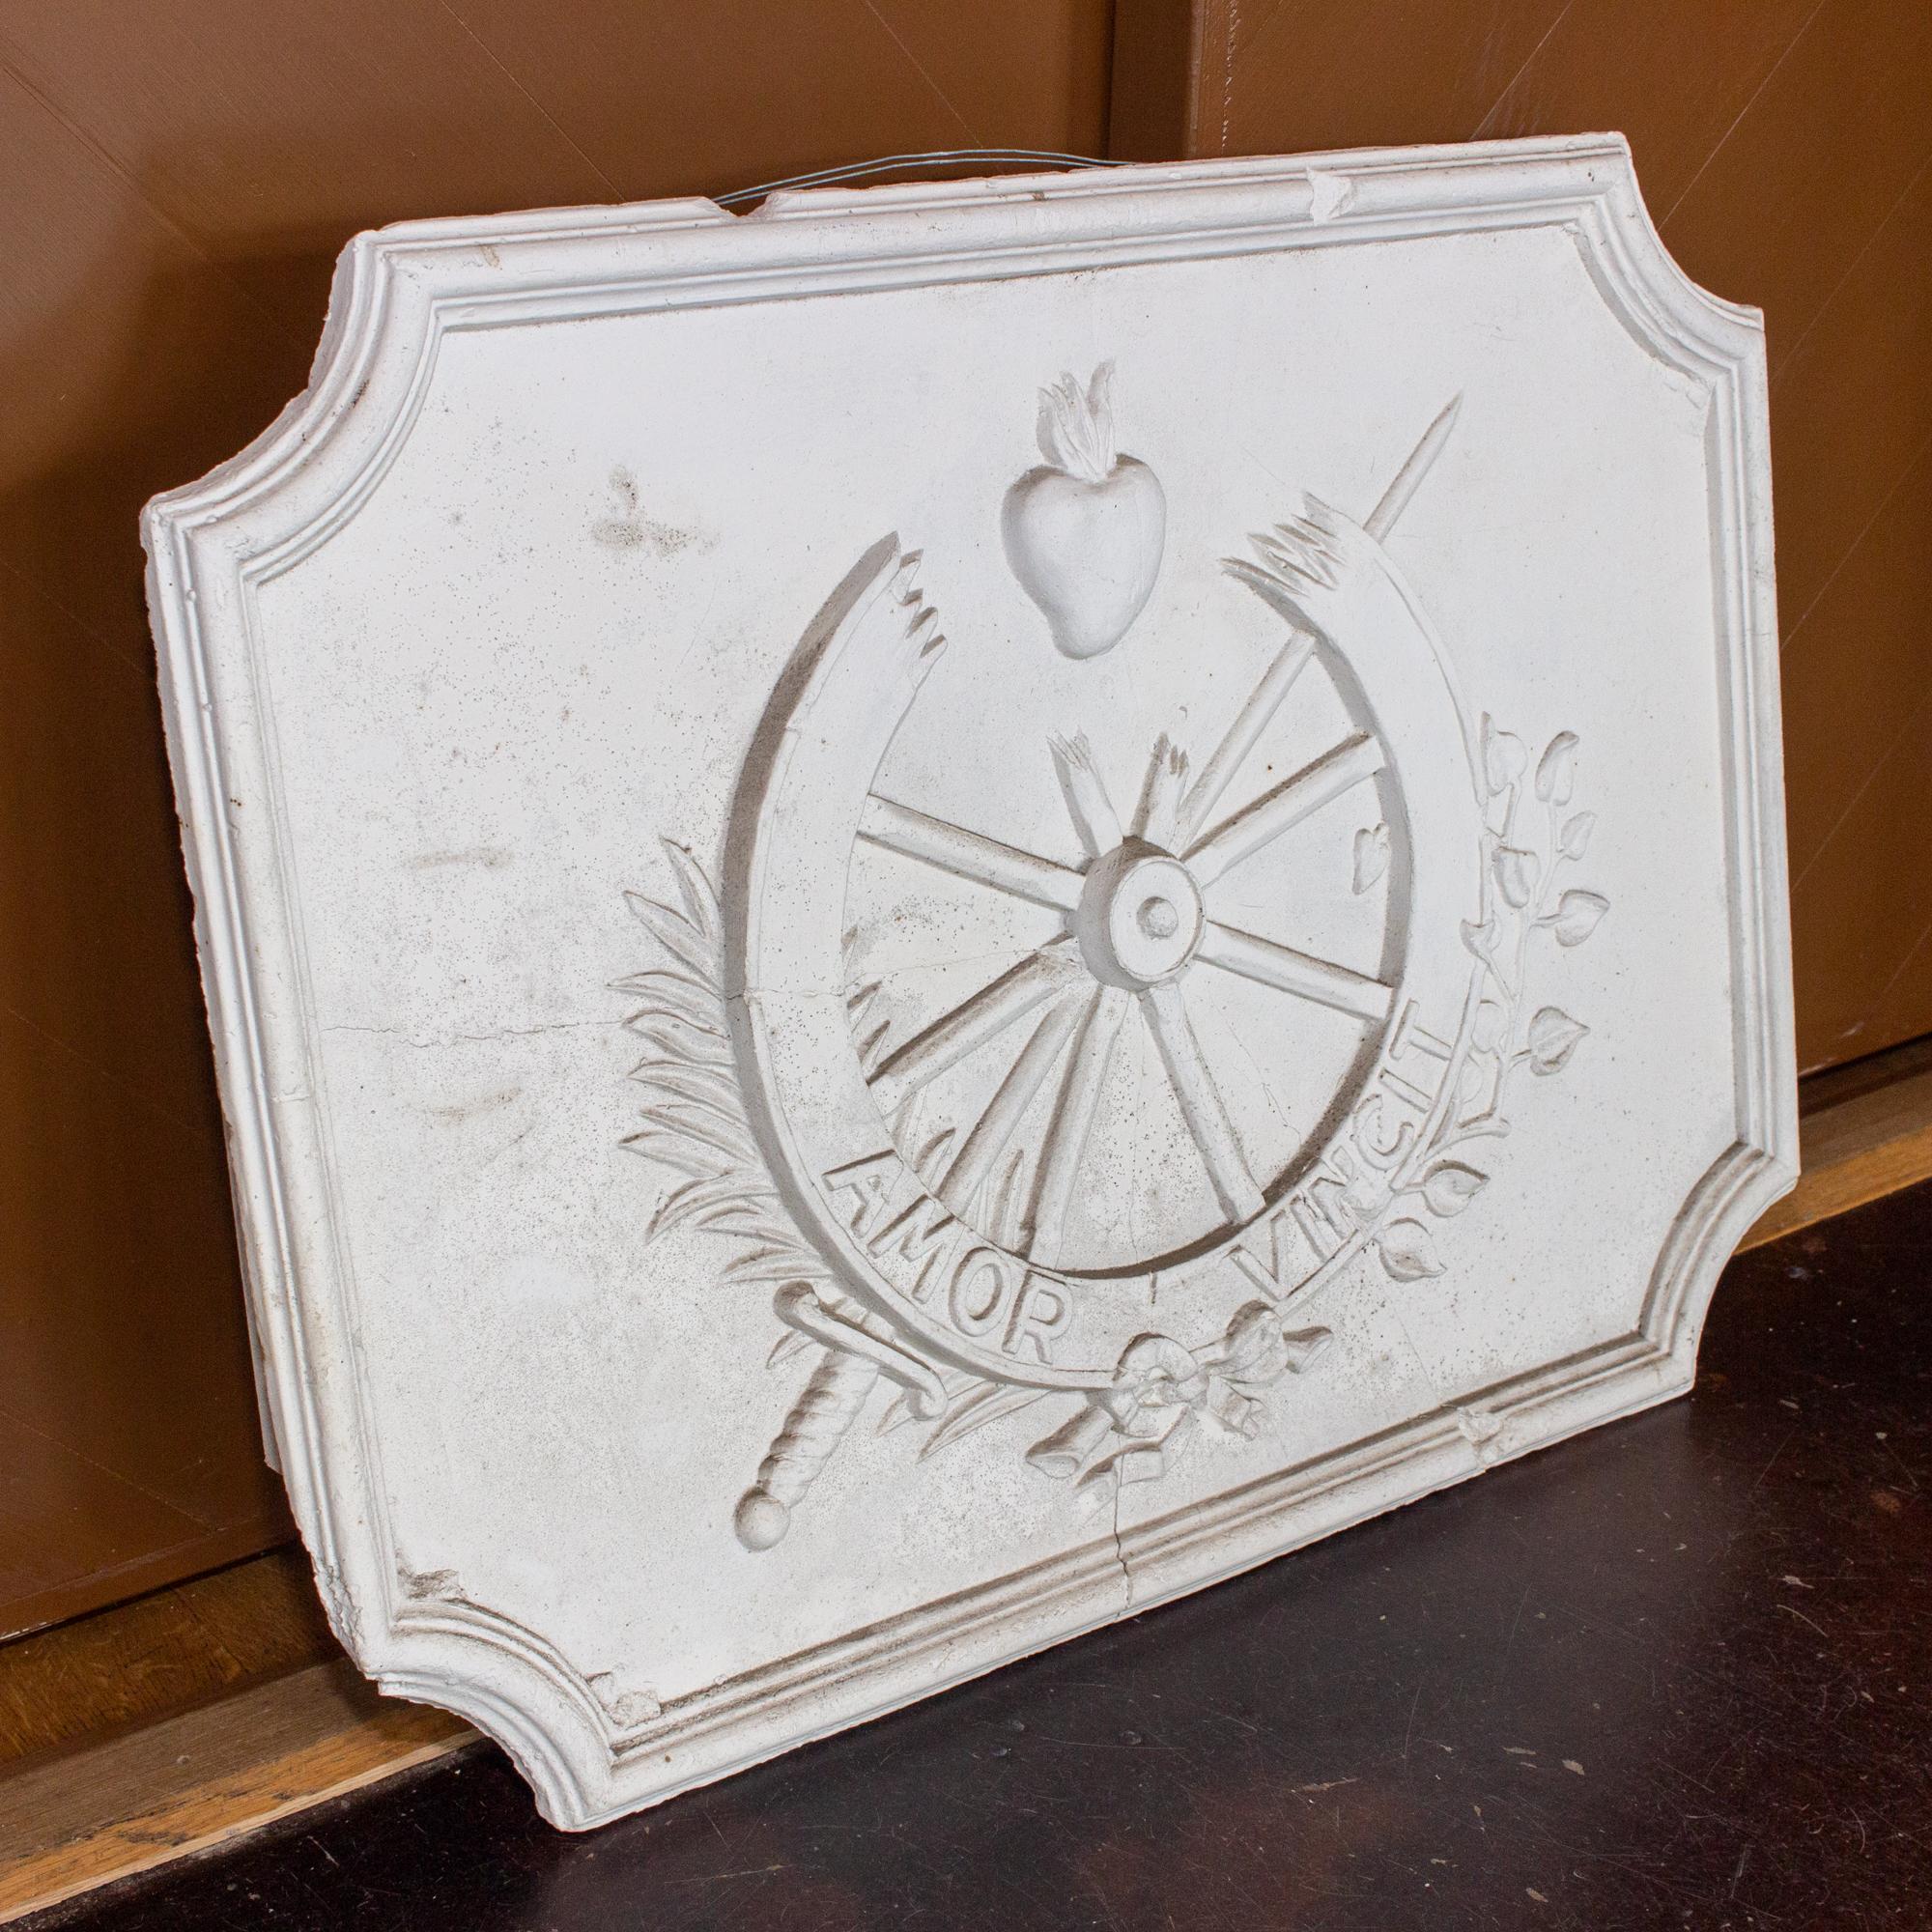 This decorative plaster wall panel features intriguing nautical imagery. First, the 